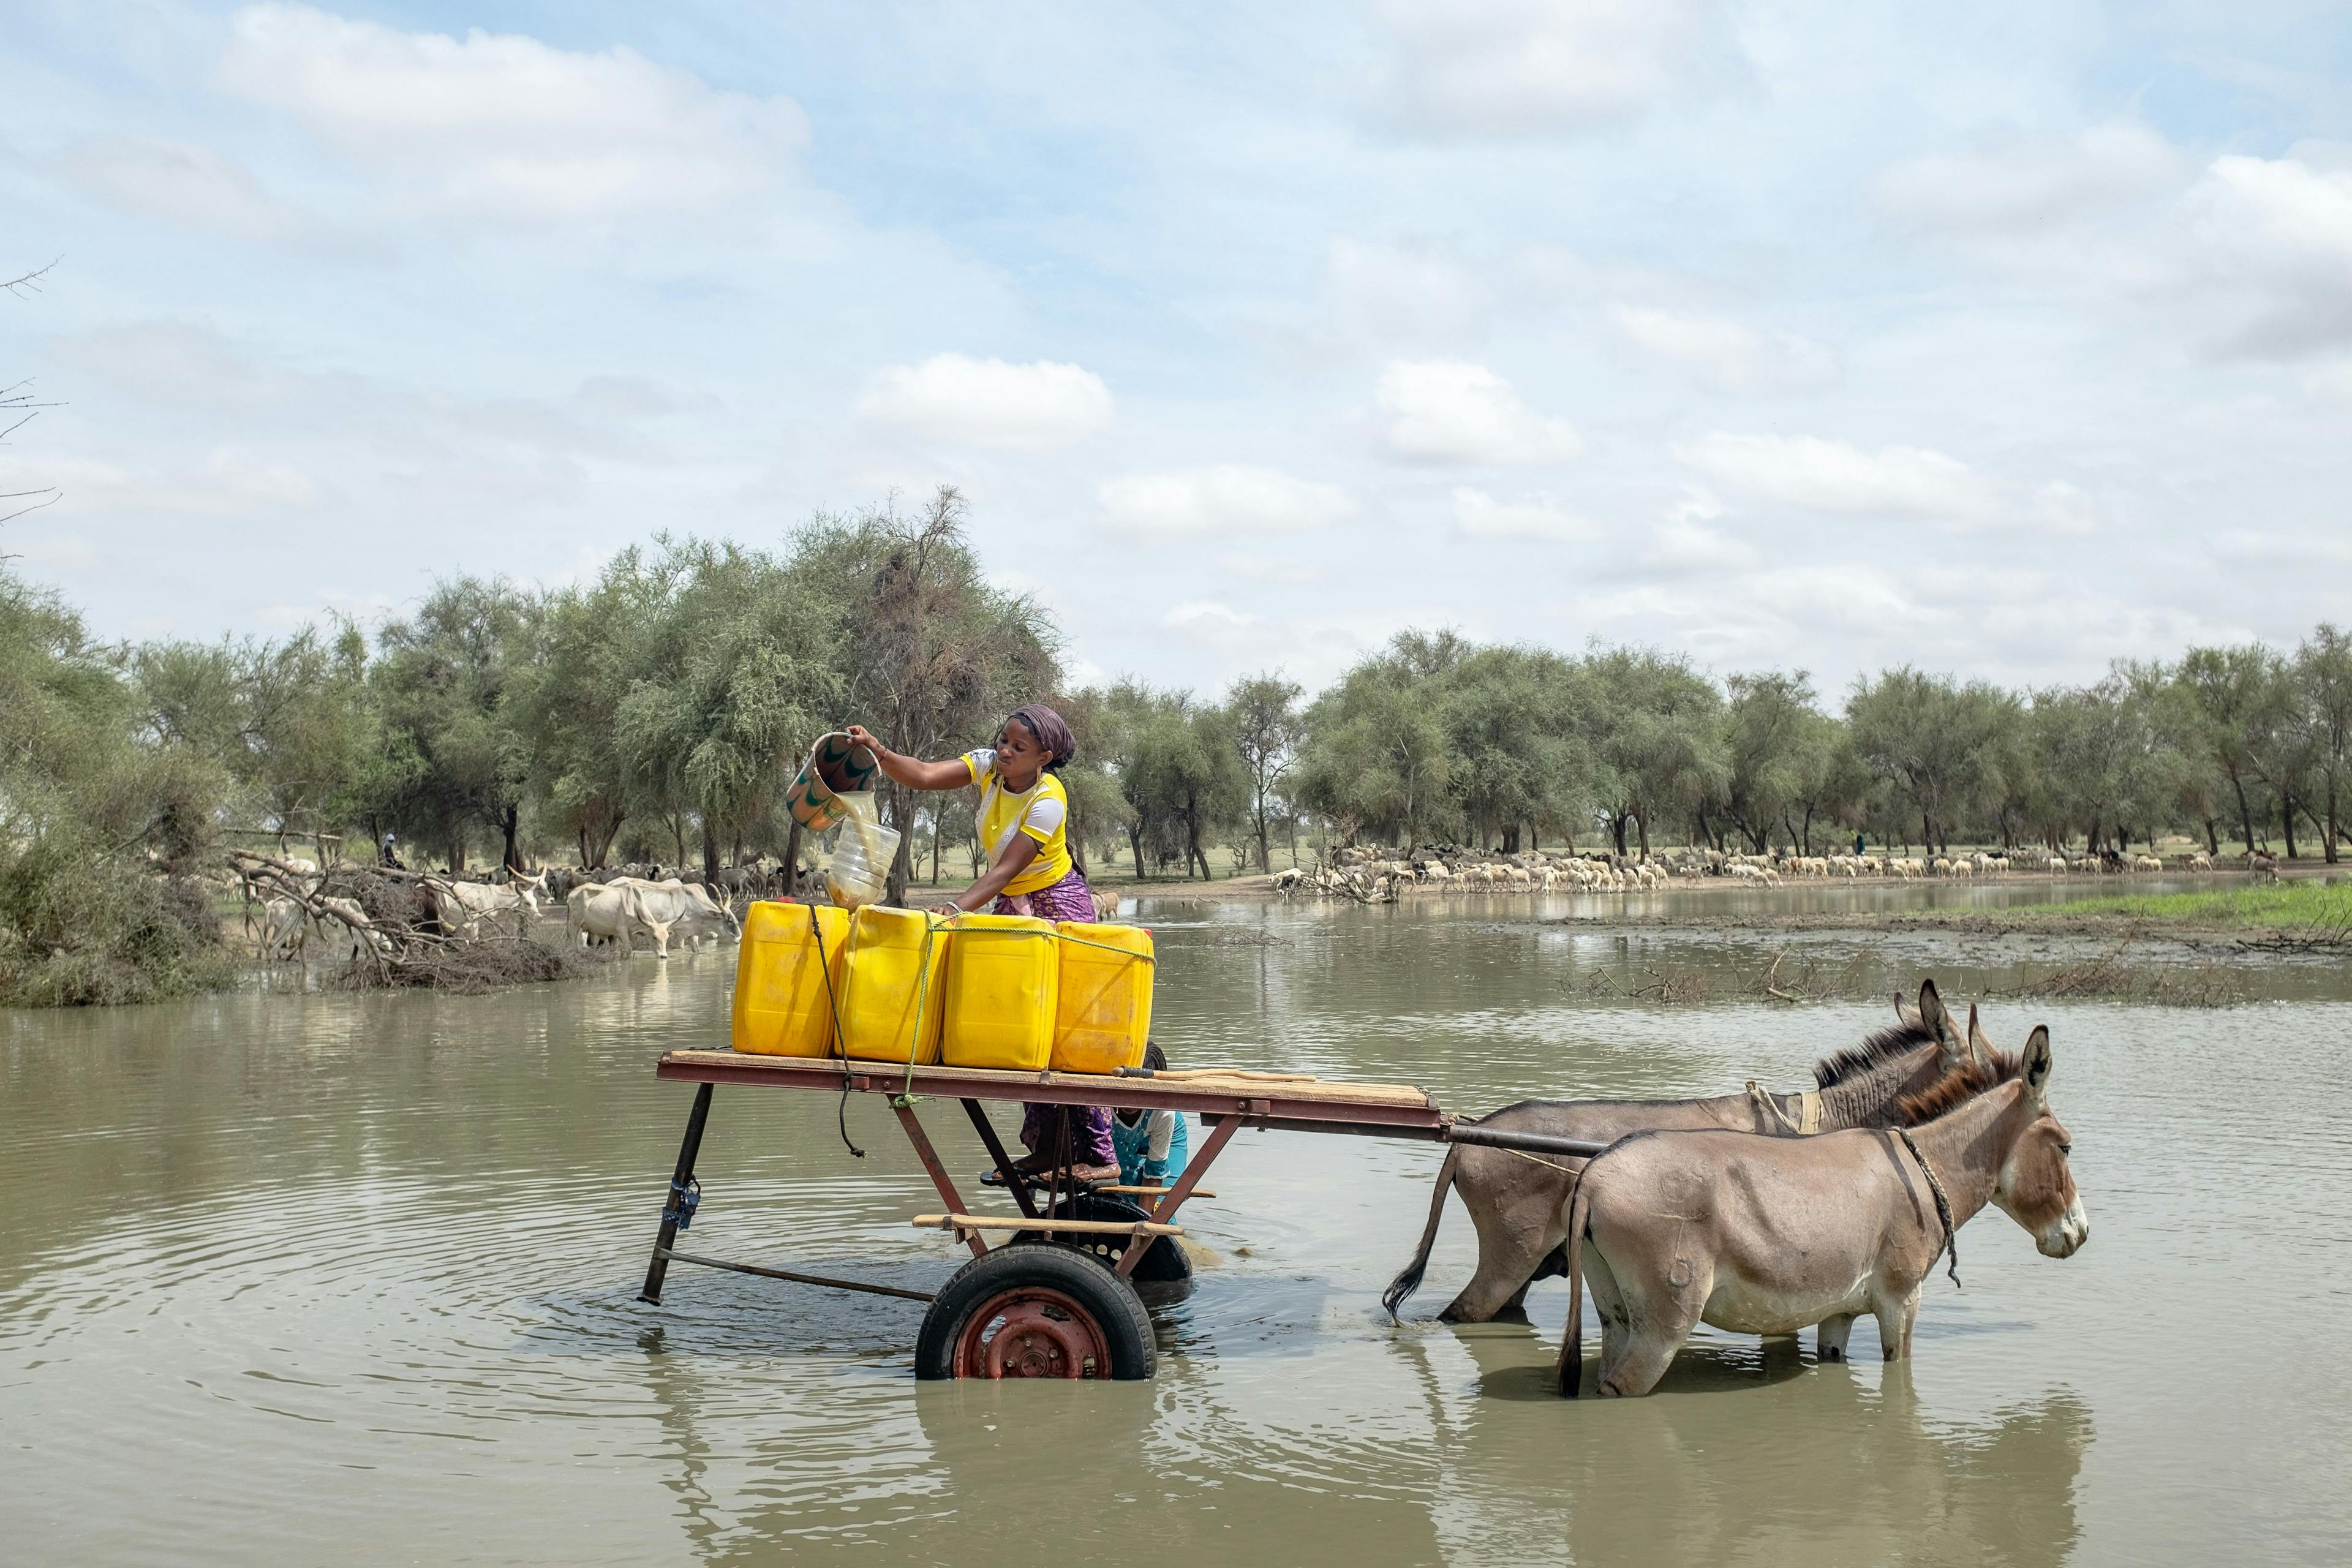 Women’s work: a heavier burden. When climate disruptions drive farmers to move, this often splits families. Women are less likely to migrate, and face additional burdens when they stay behind. Here, a Fulani woman tends to her domestic duties — fetching the family’s water — while the men herd the flocks.